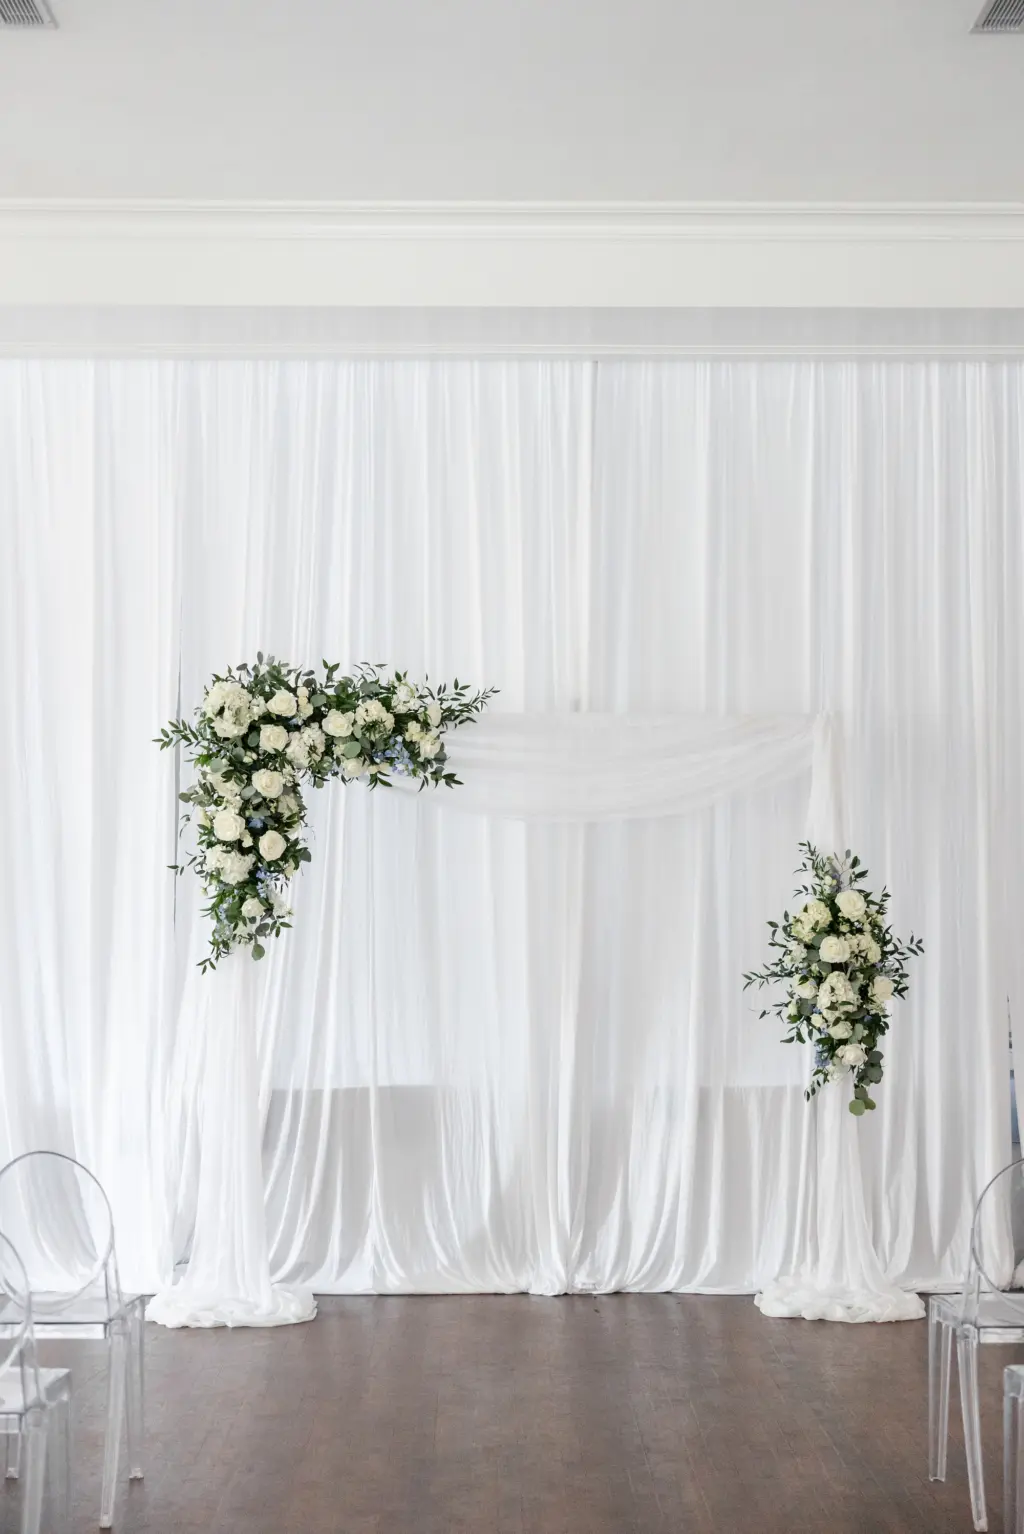 White Drapery and Piping | Asymmetrical Floral Arrangements with White Roses, Blue Flowers, and Greenery Wedding Ceremony Arch Ideas | Tampa Bay Kate Ryan Event Rentals | Florist Monarch Events and Design